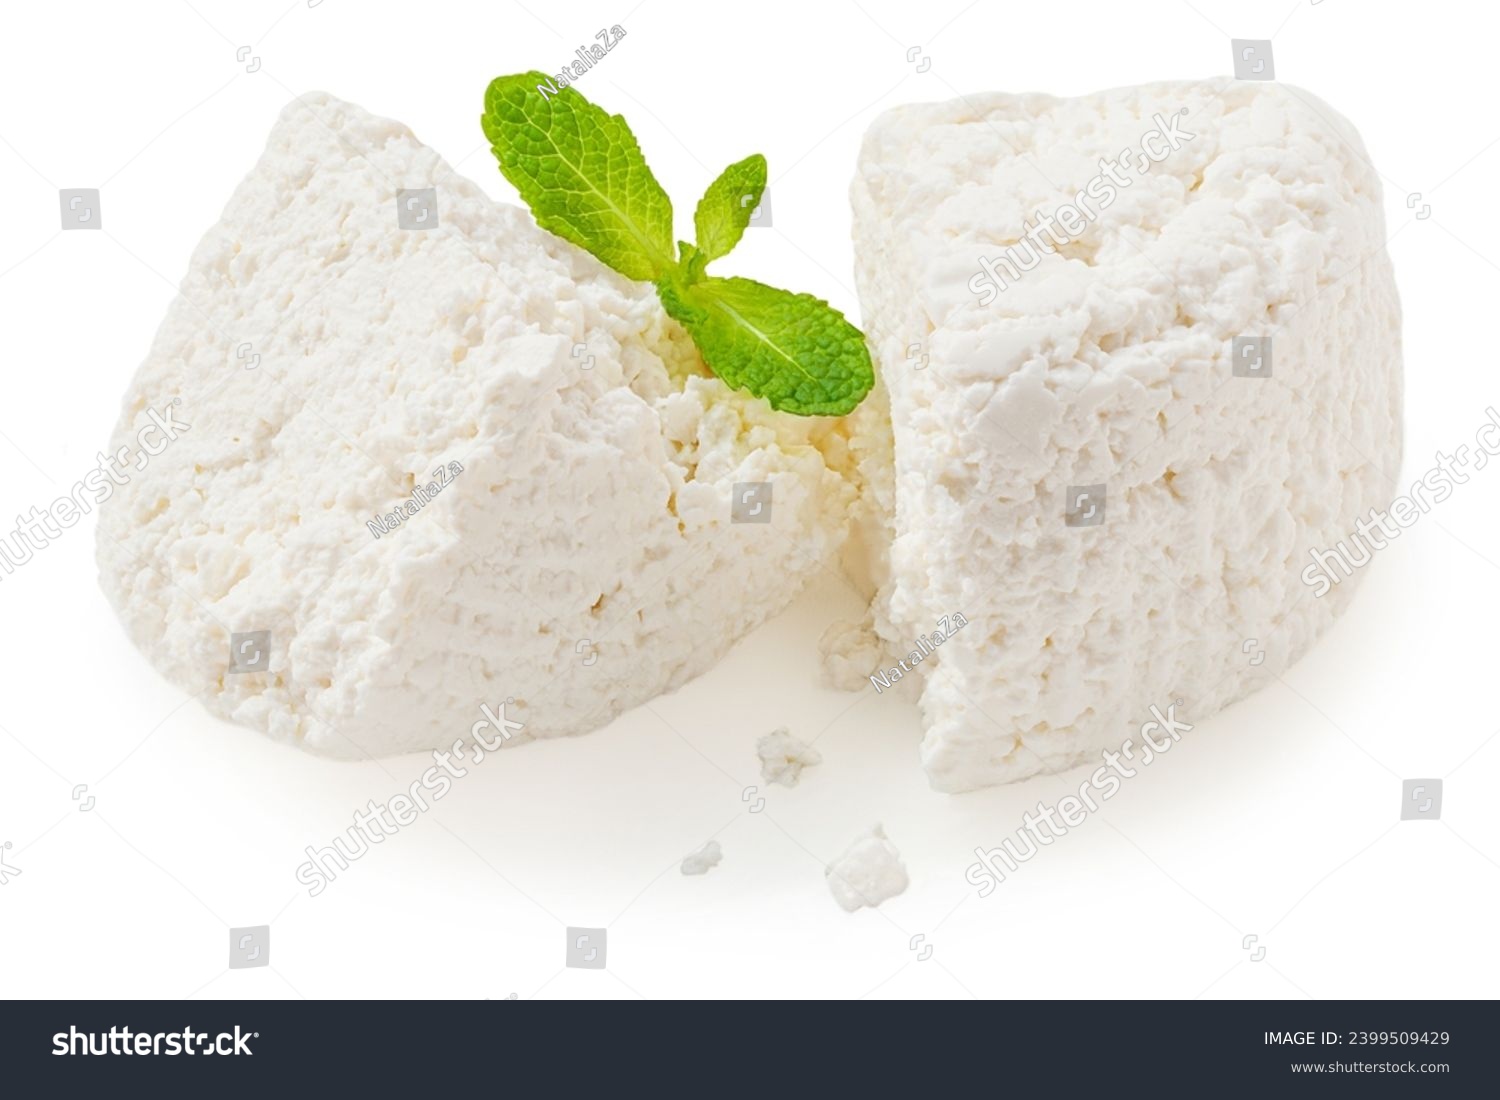 Cottage cheese isolated on white background closeup. Fresh grainy cottage cheese or feta with mint leaf close up #2399509429